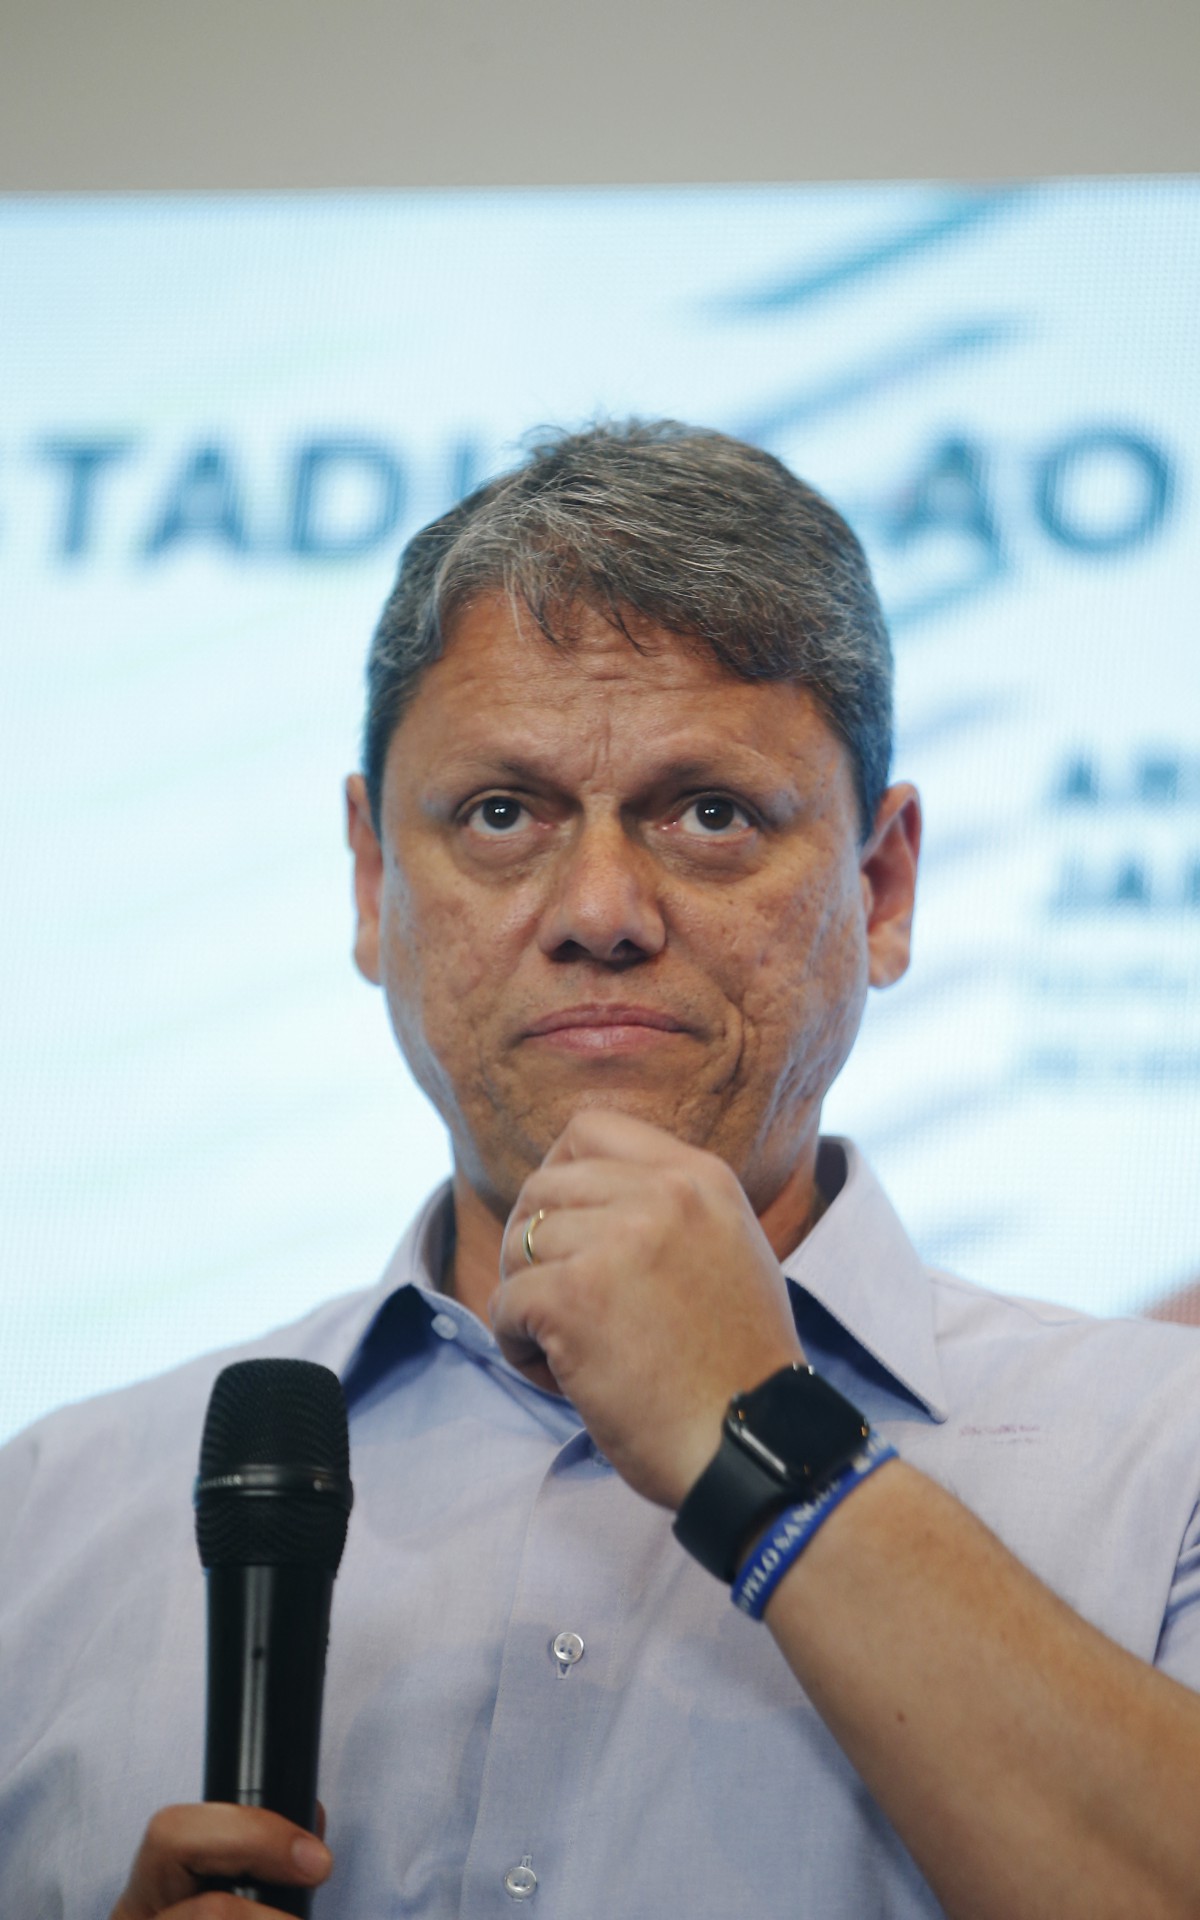 Brazilian Tarcisio de Freitas, candidate for governor of Sao Paulo, speaks during a press conference in Sao Paulo, Brazil, on October 17, 2022. The candidate for governor of Sao Paulo supported by Jair Bolsonaro, Tarcisio de Freitas, had to interrupt a campaign activity on October 17, 2022, in one of the favelas in Paraisopolis, in southern Sao Paulo due to a shooting, which authorities were trying to determine whether or not it was directed against him.
 - Miguel Schincariol / AFP